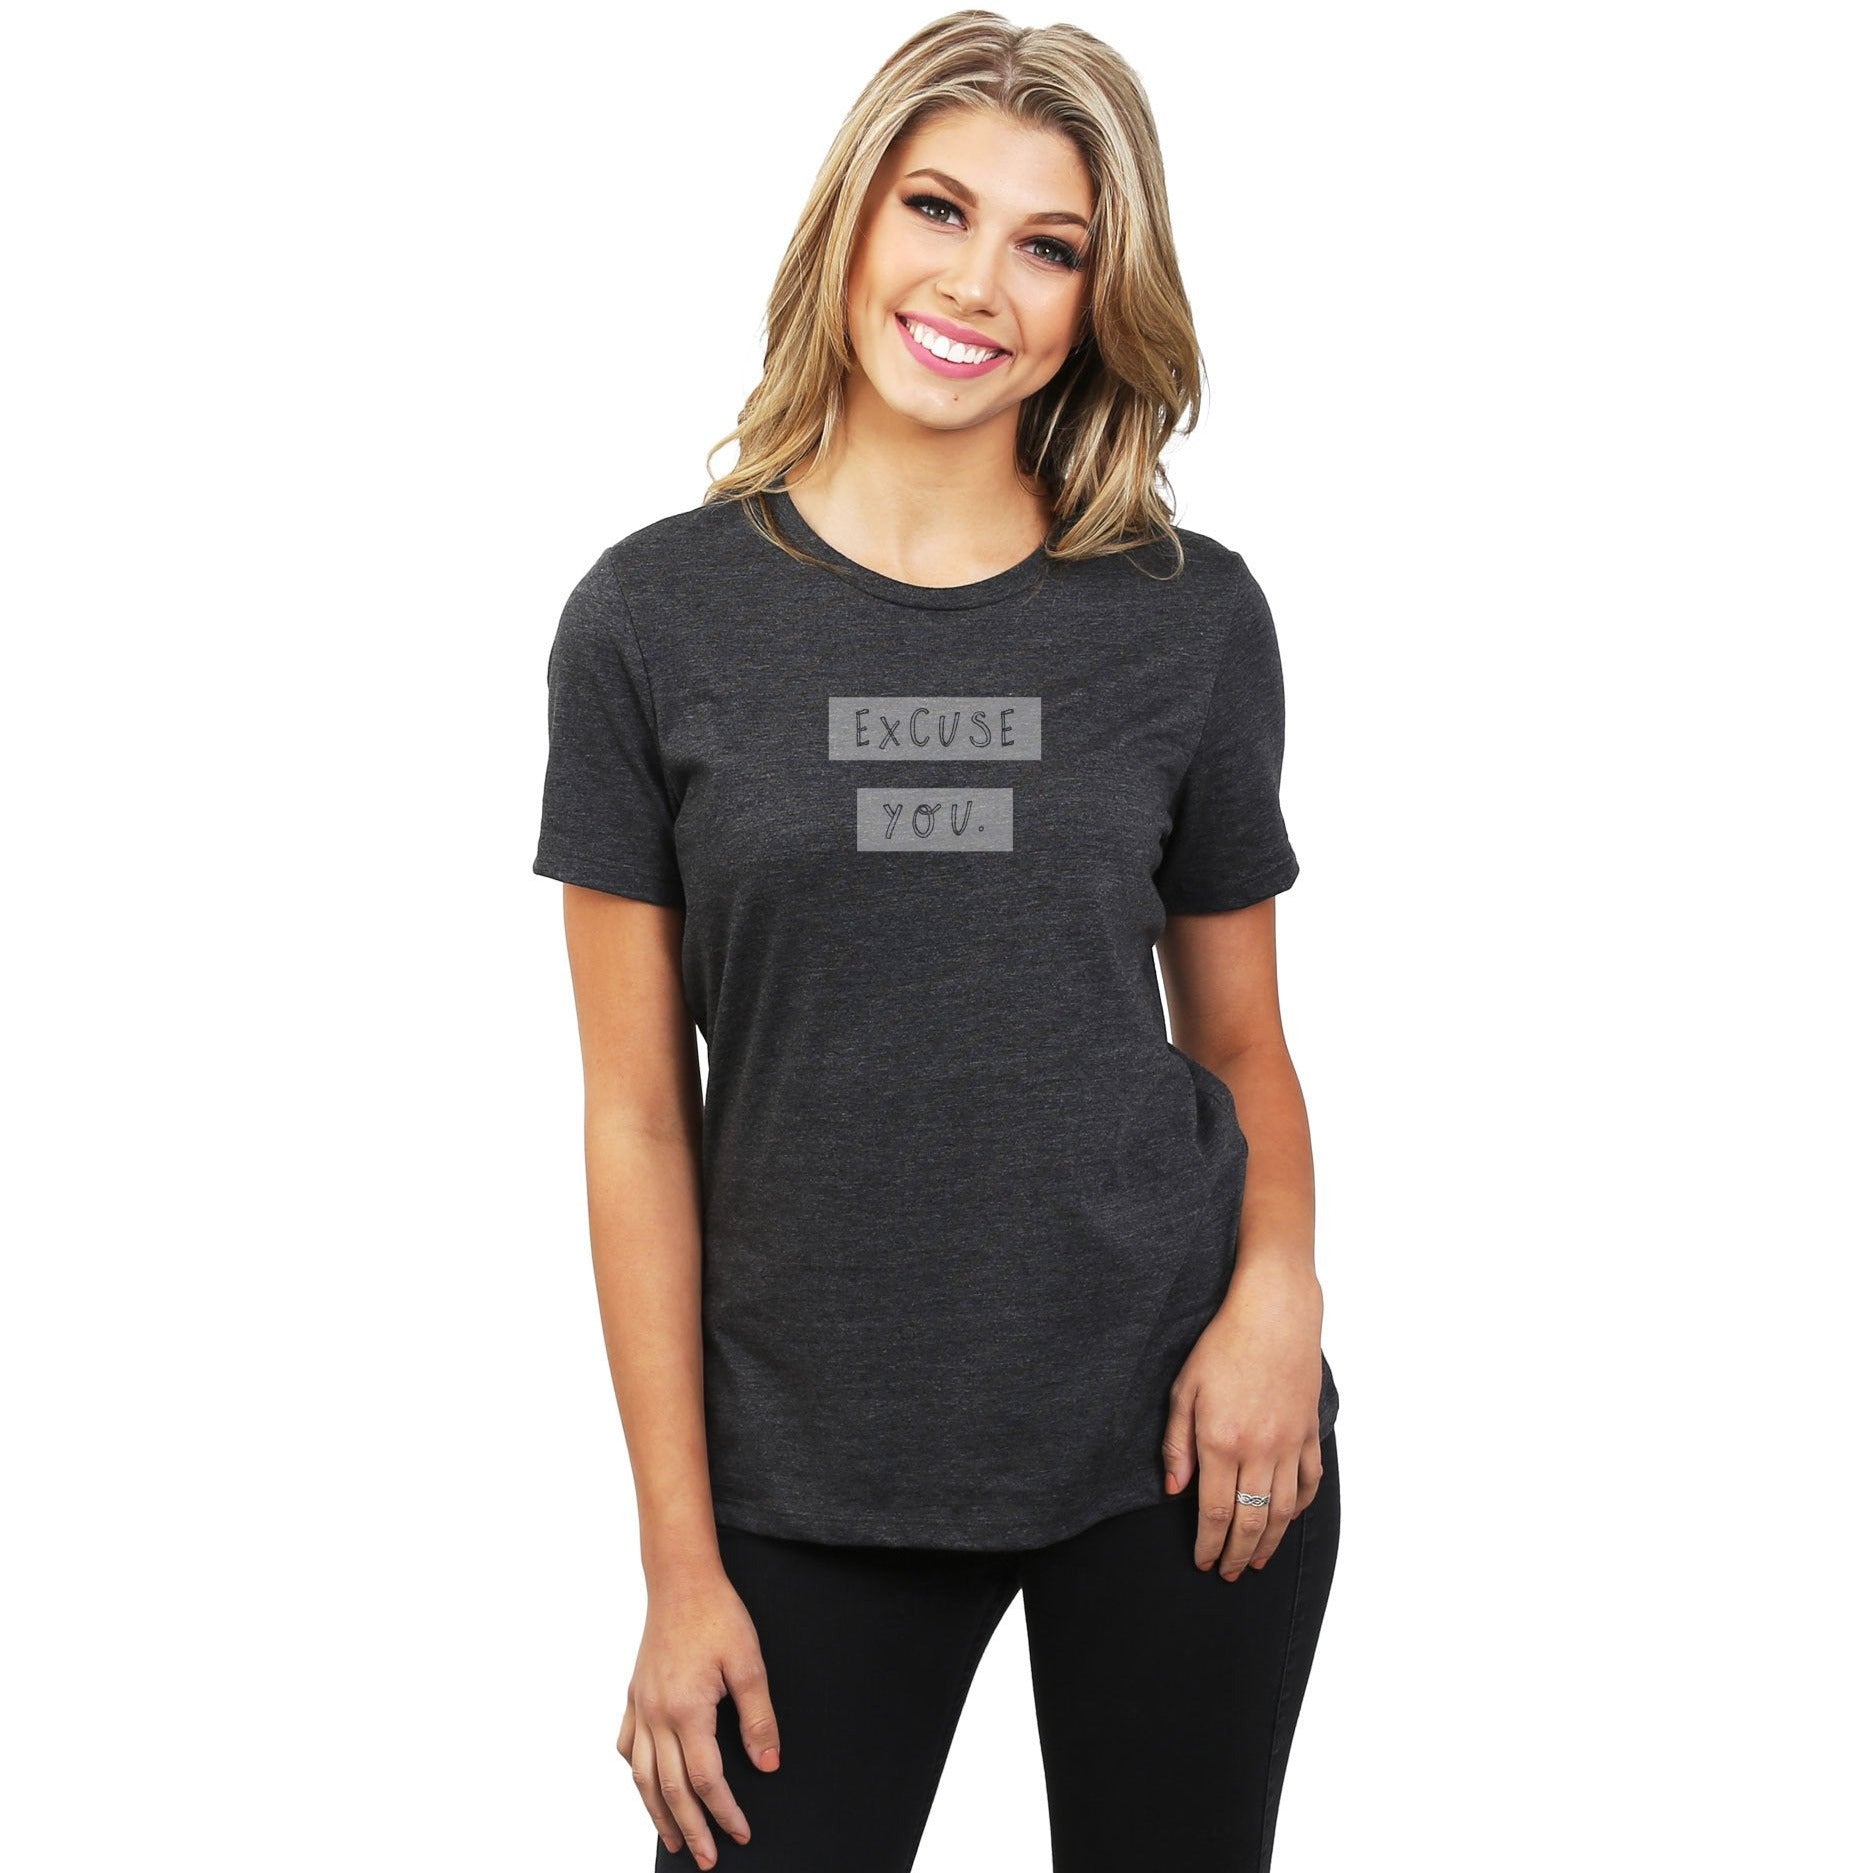 Excuse You Women's Relaxed Crewneck T-Shirt Top Tee Charcoal Model
